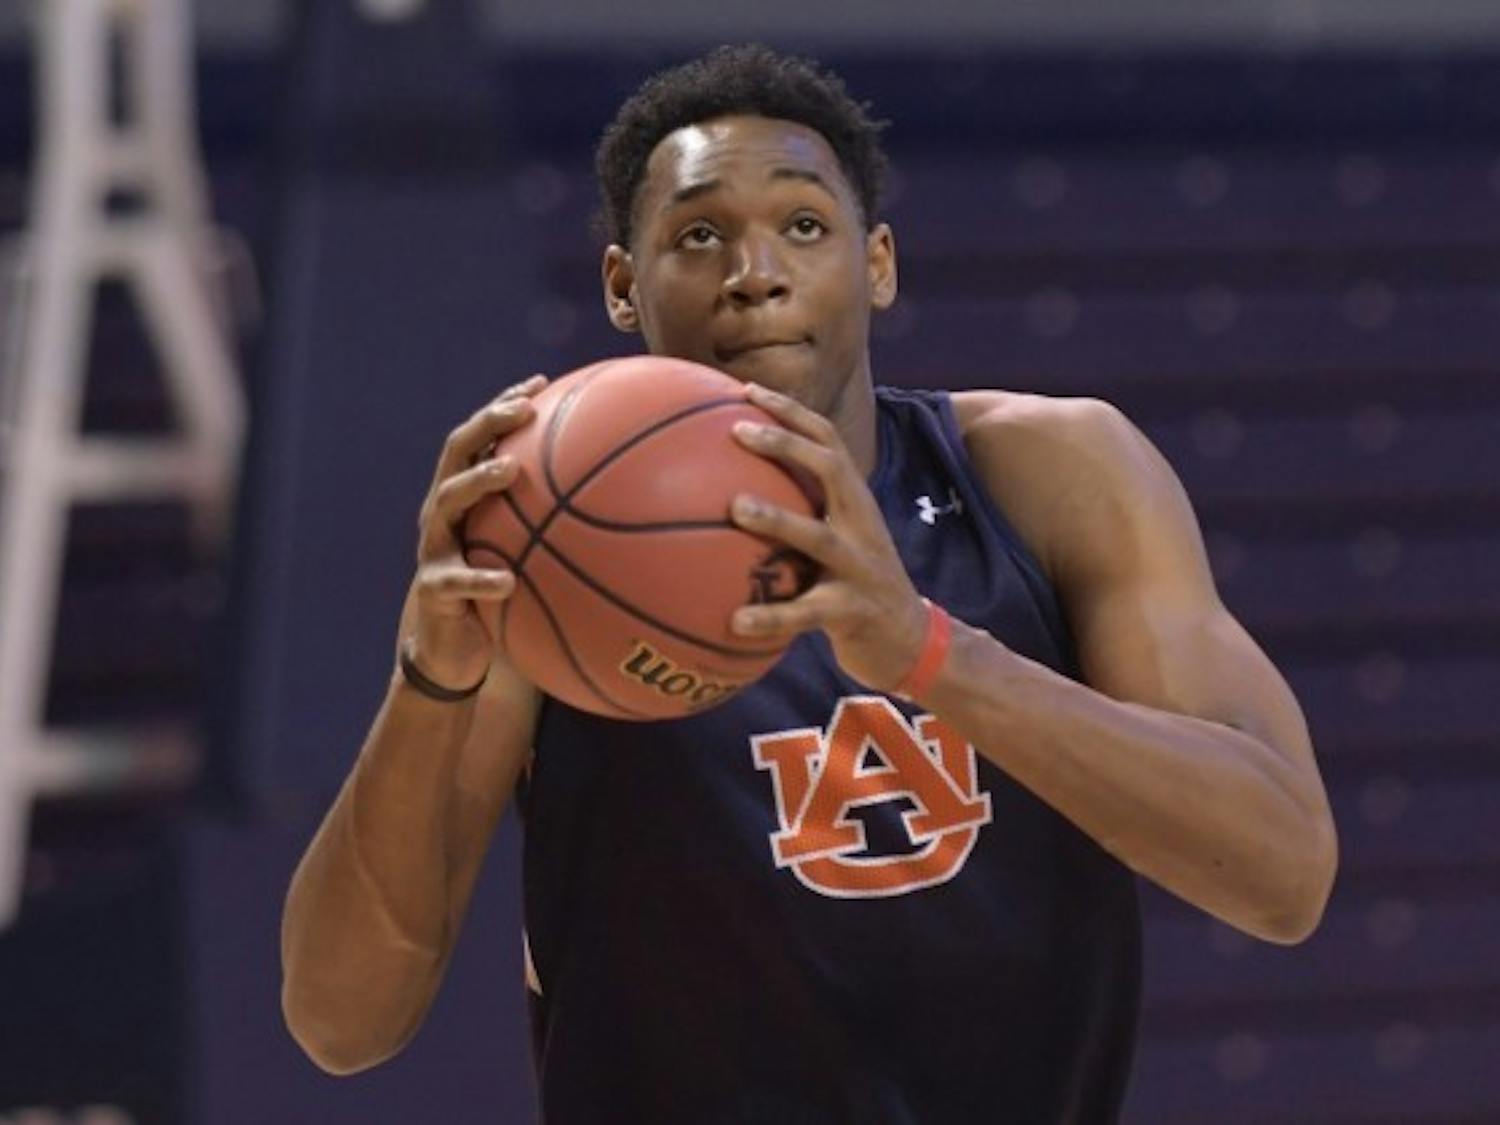 Austin Wiley practicing before his first game with Auburn against Mercer